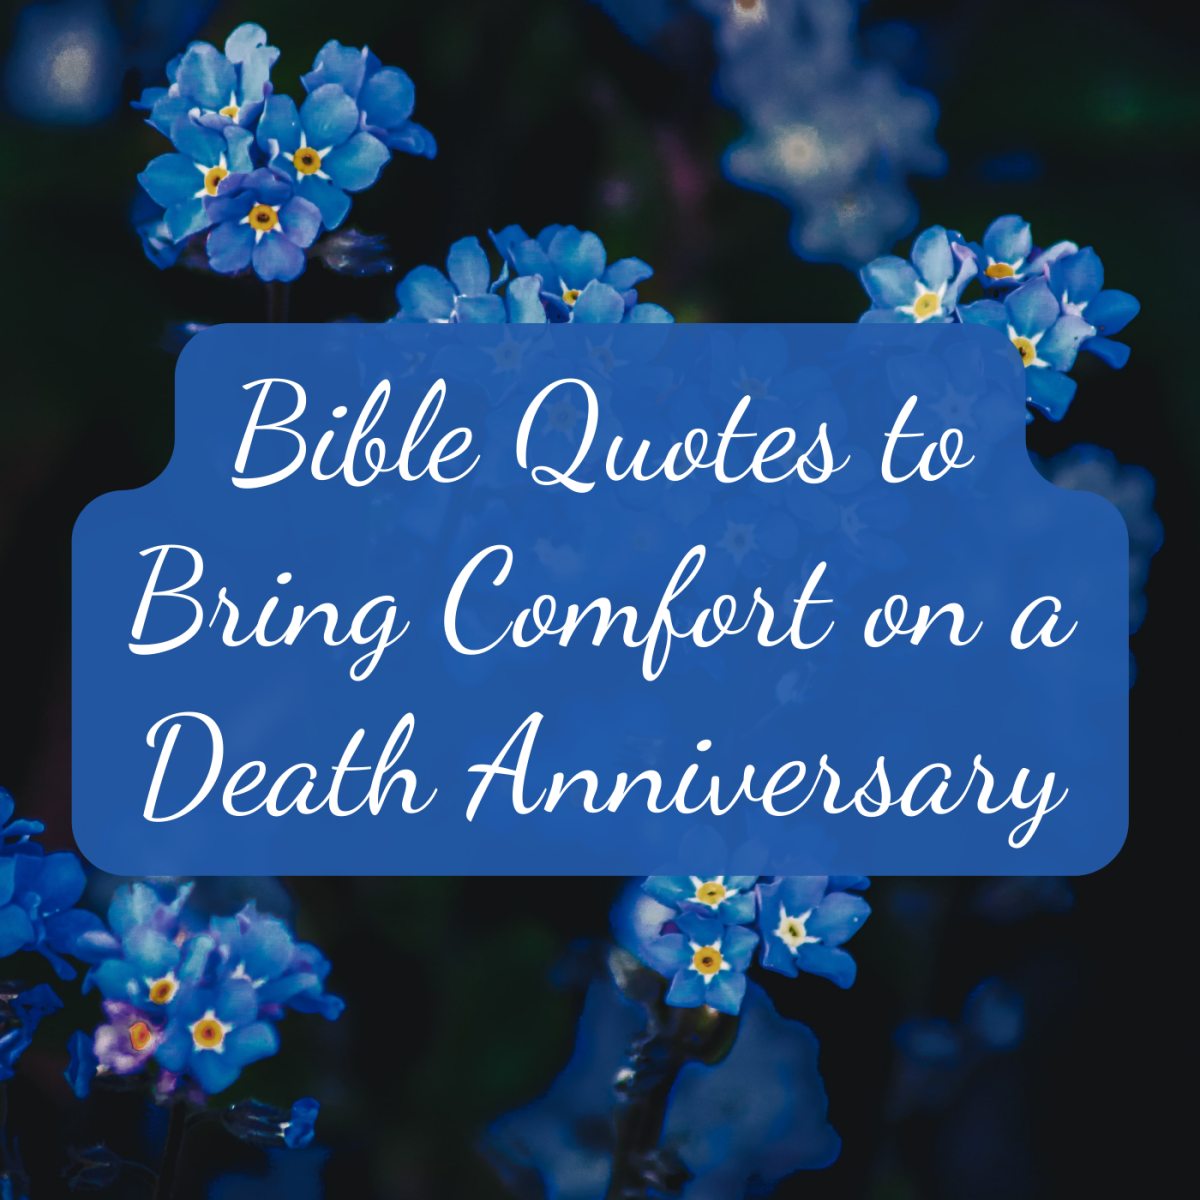 Seek out these words of comfort on the anniversary of your loved one's death.